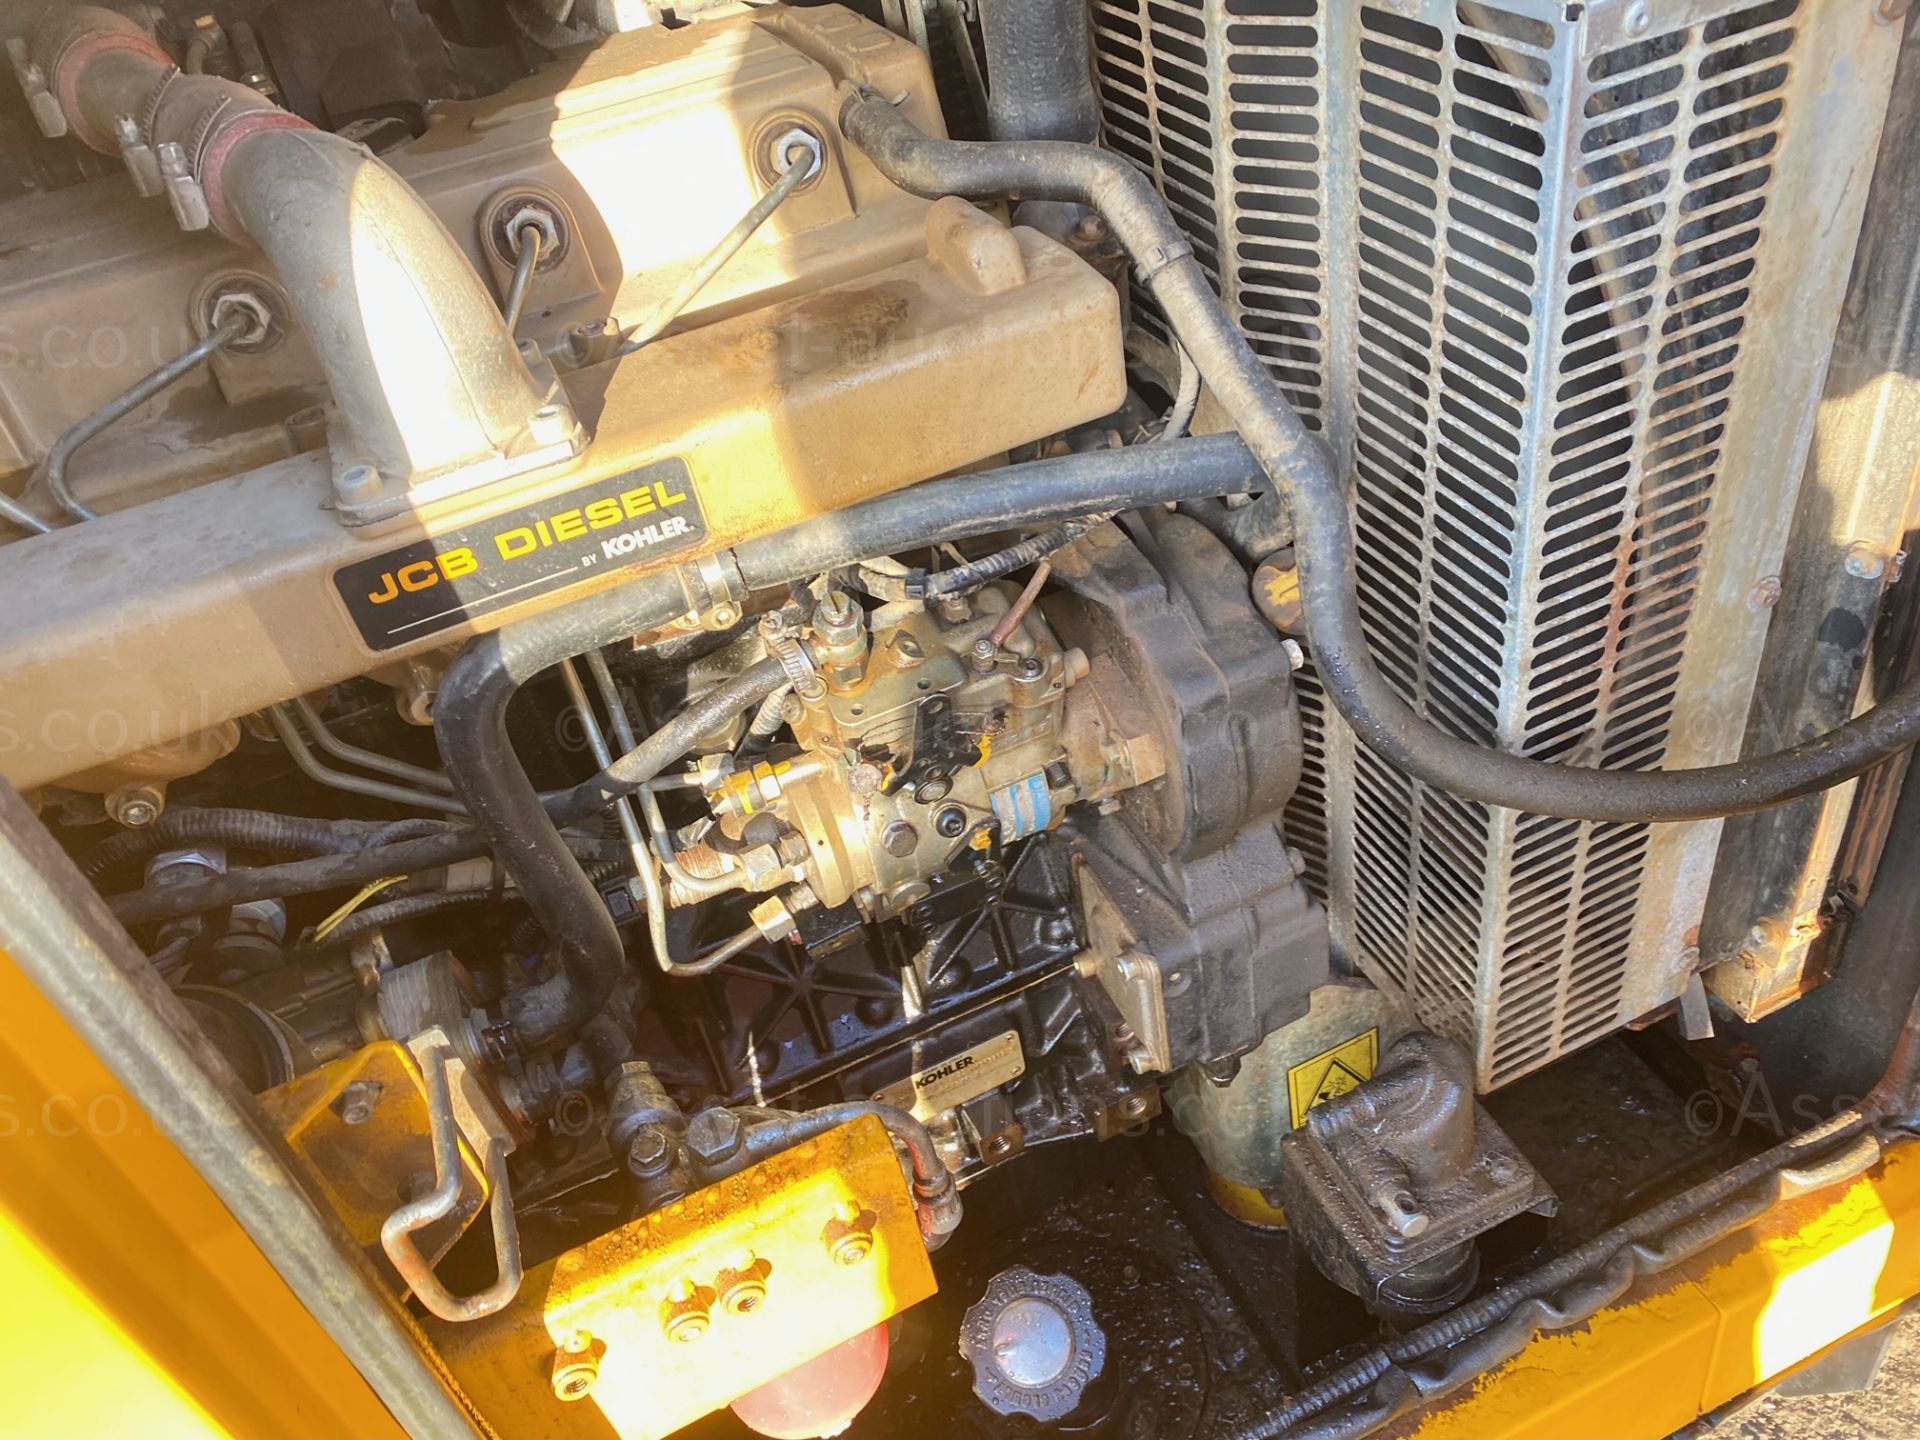 2015 JCB 45 KvA GENERATOR, BOUGHT NEW IN 2016, 4500 HOURS, START RUNS AND PRODUCES POWER *PLUS VAT* - Image 5 of 7